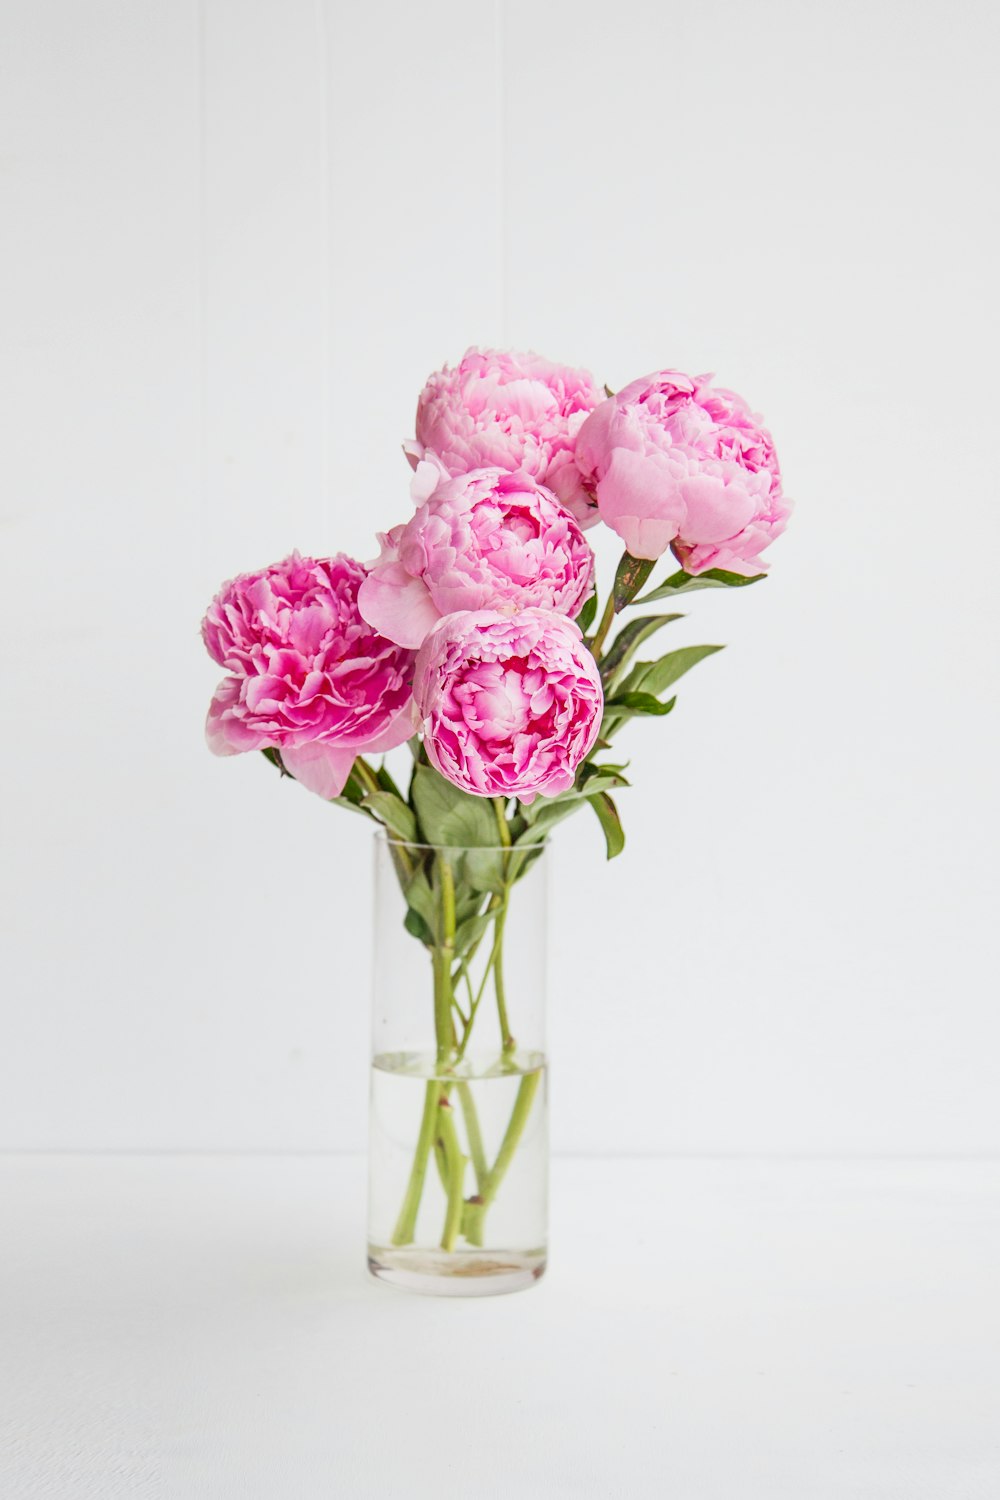 500+ Peony Pictures [HD] | Download Free Images & Stock Photos on Unsplash